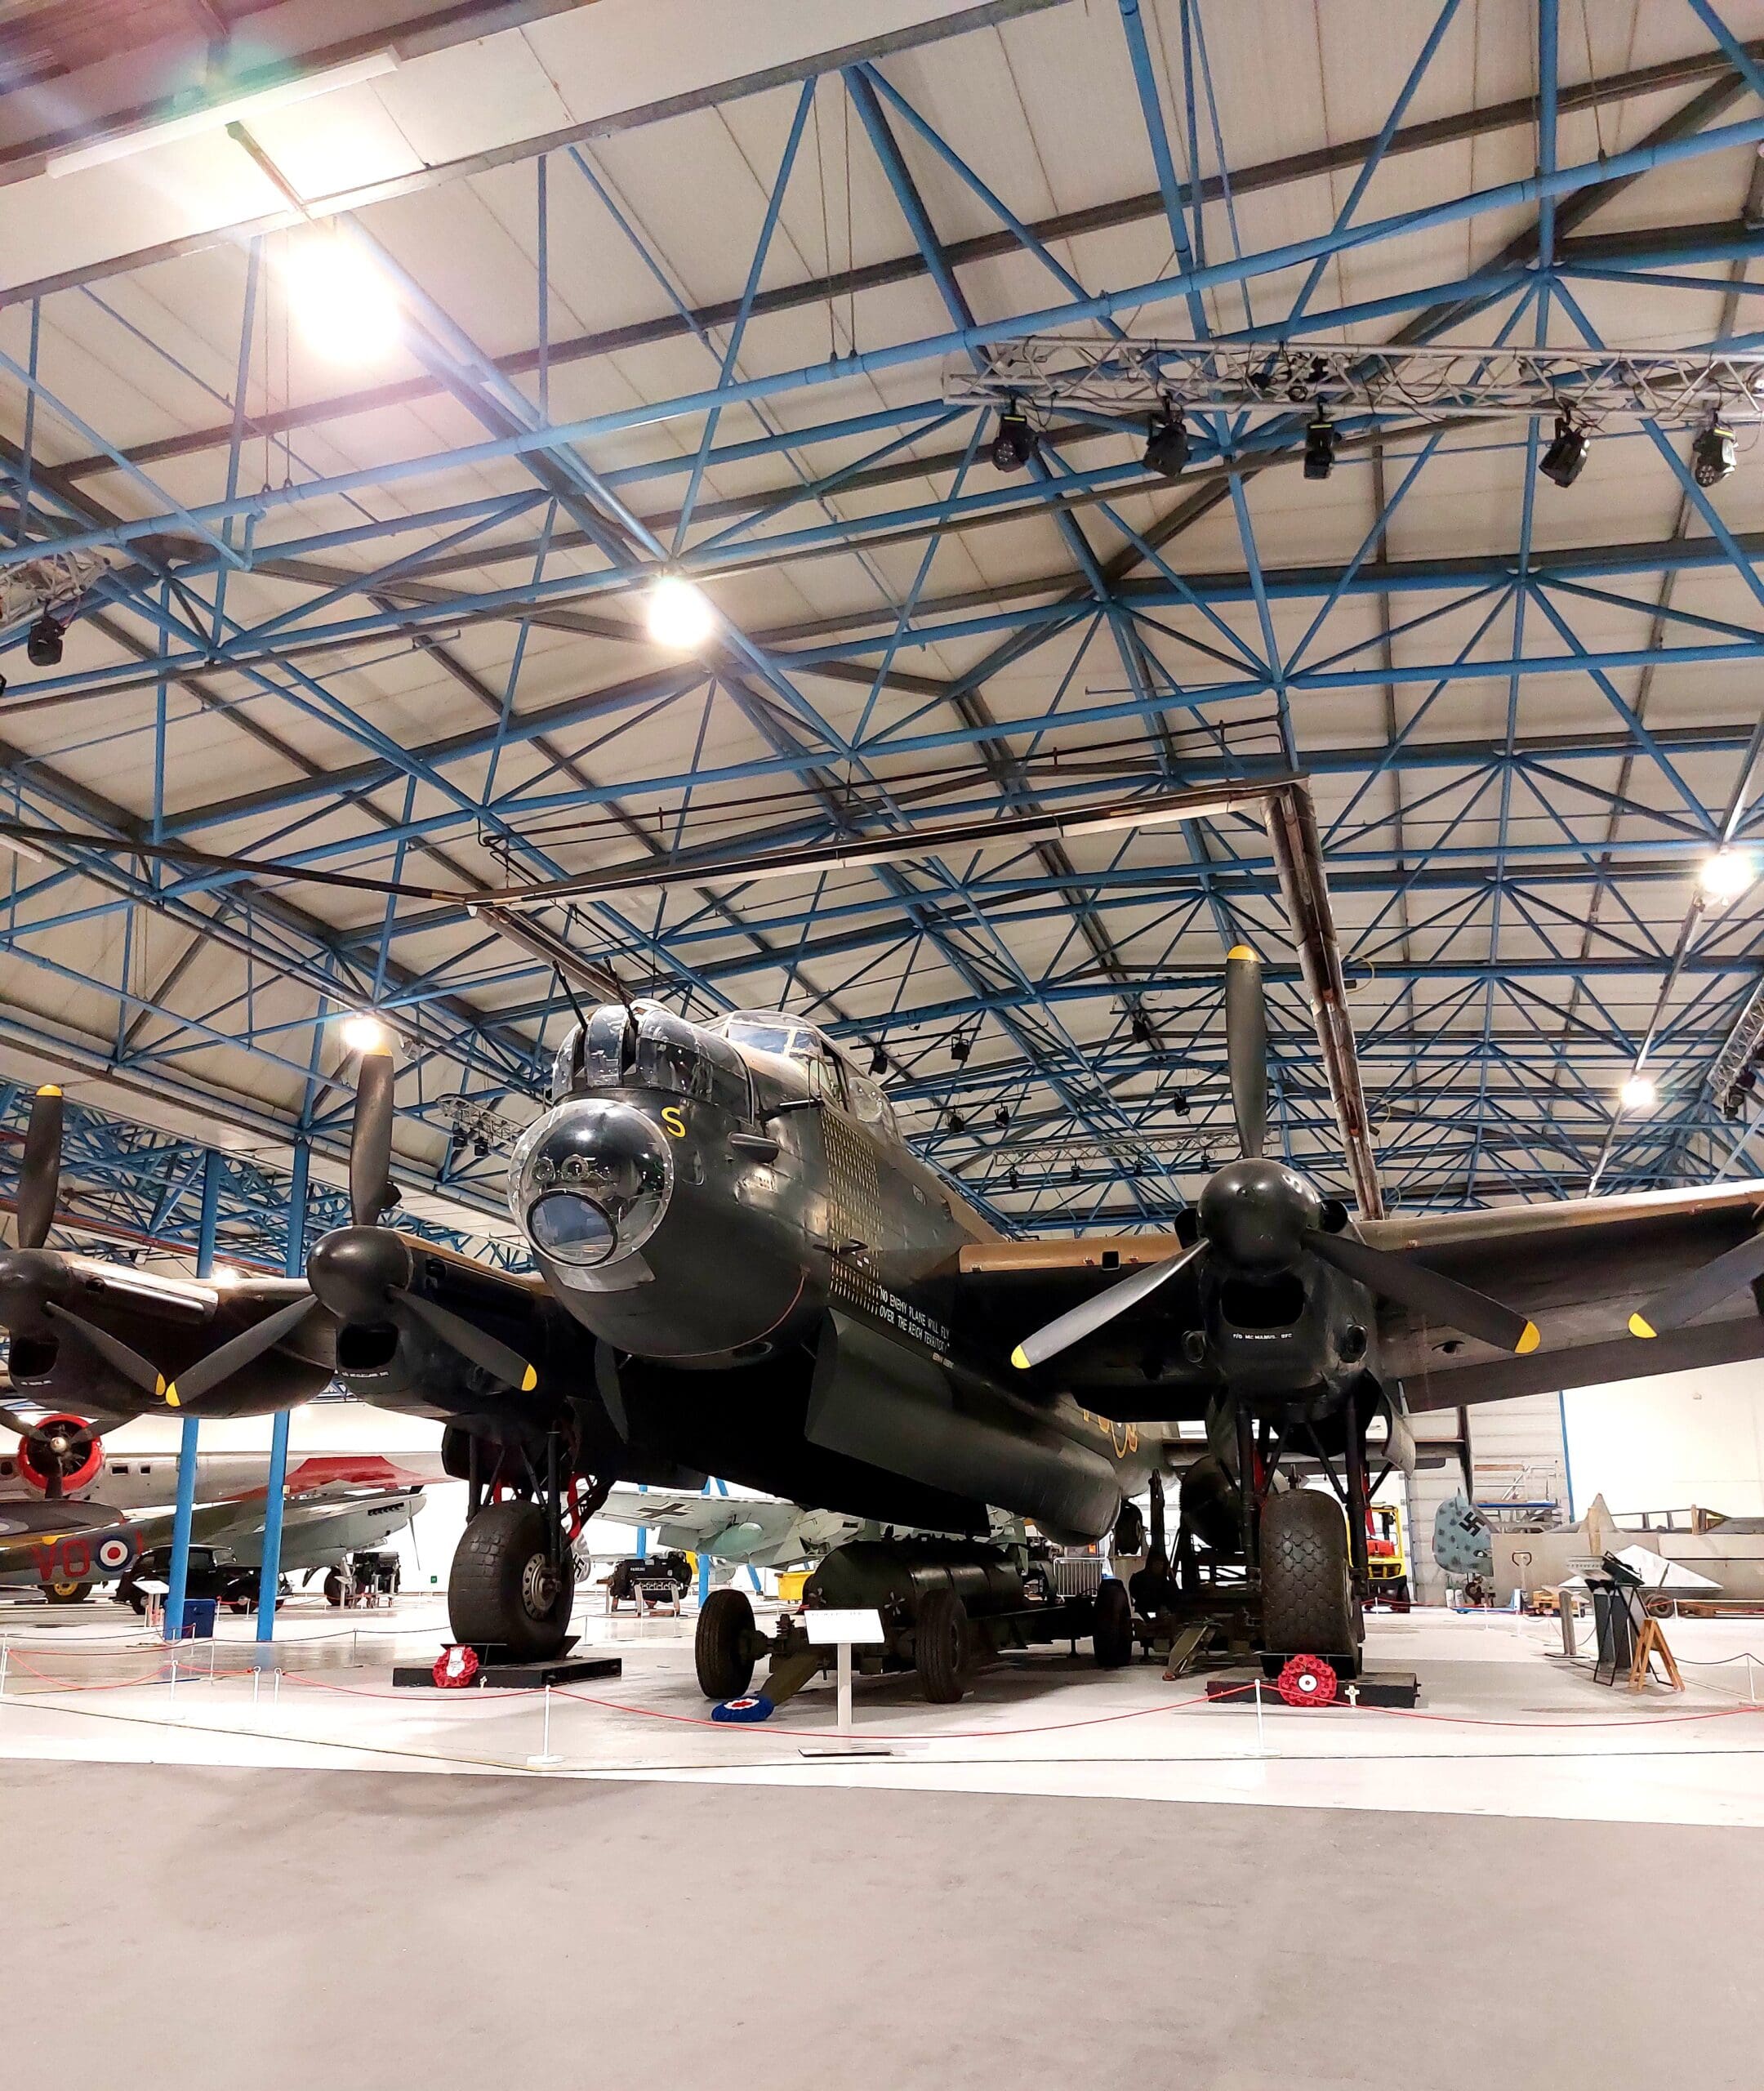 A visit to the London RAF Museum